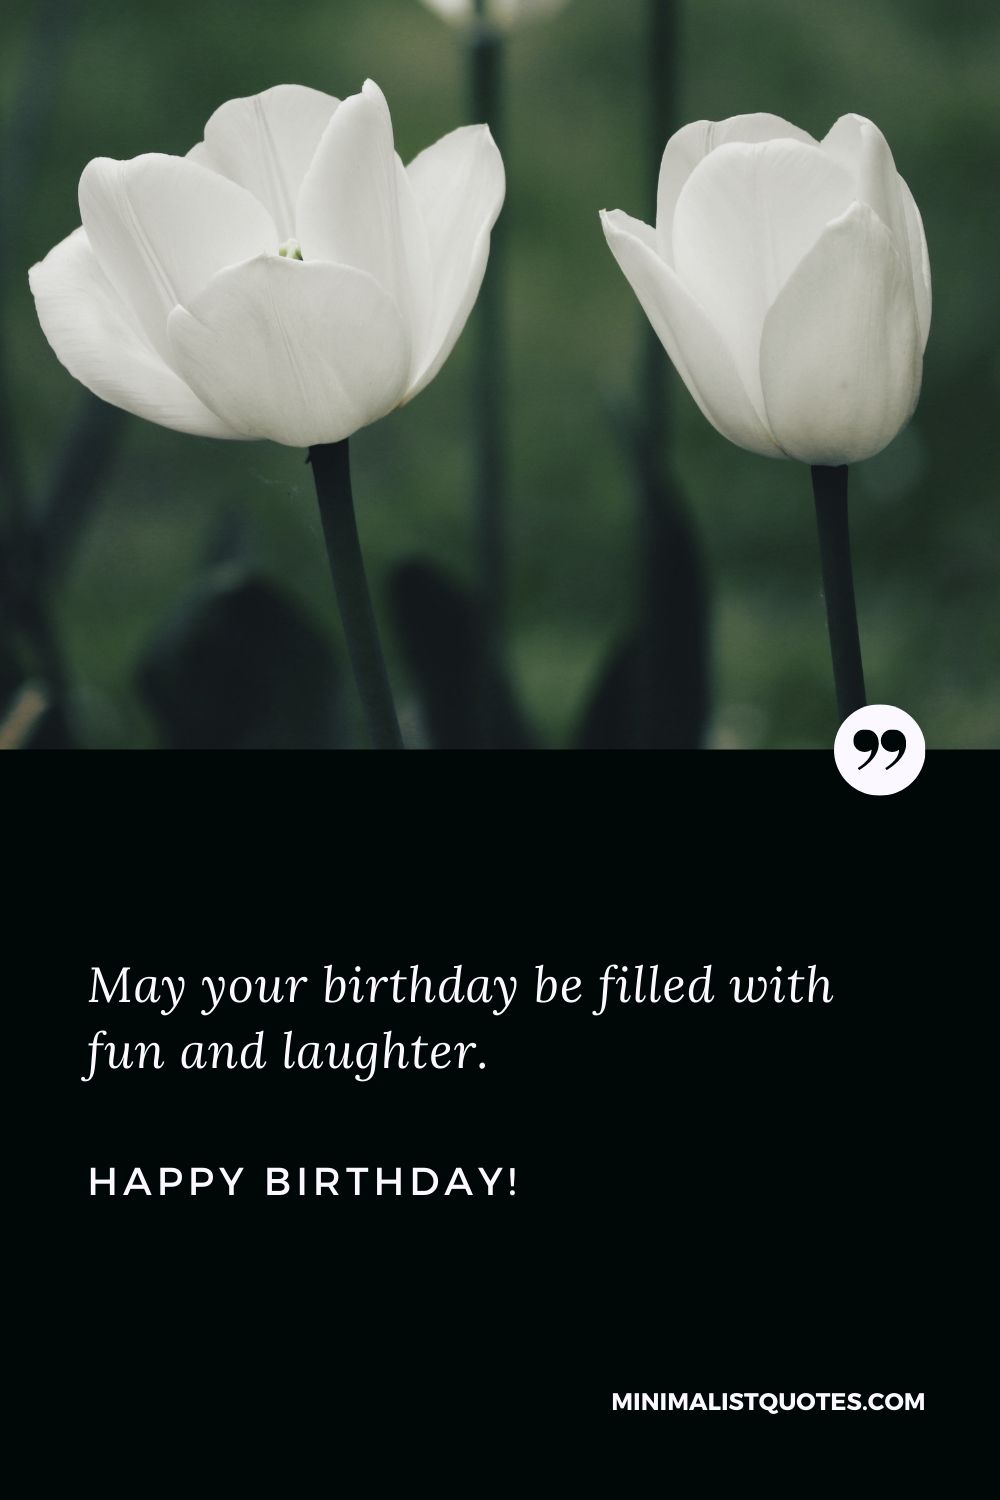 105 Short & Simple Birthday Wishes for the Minimalist in You